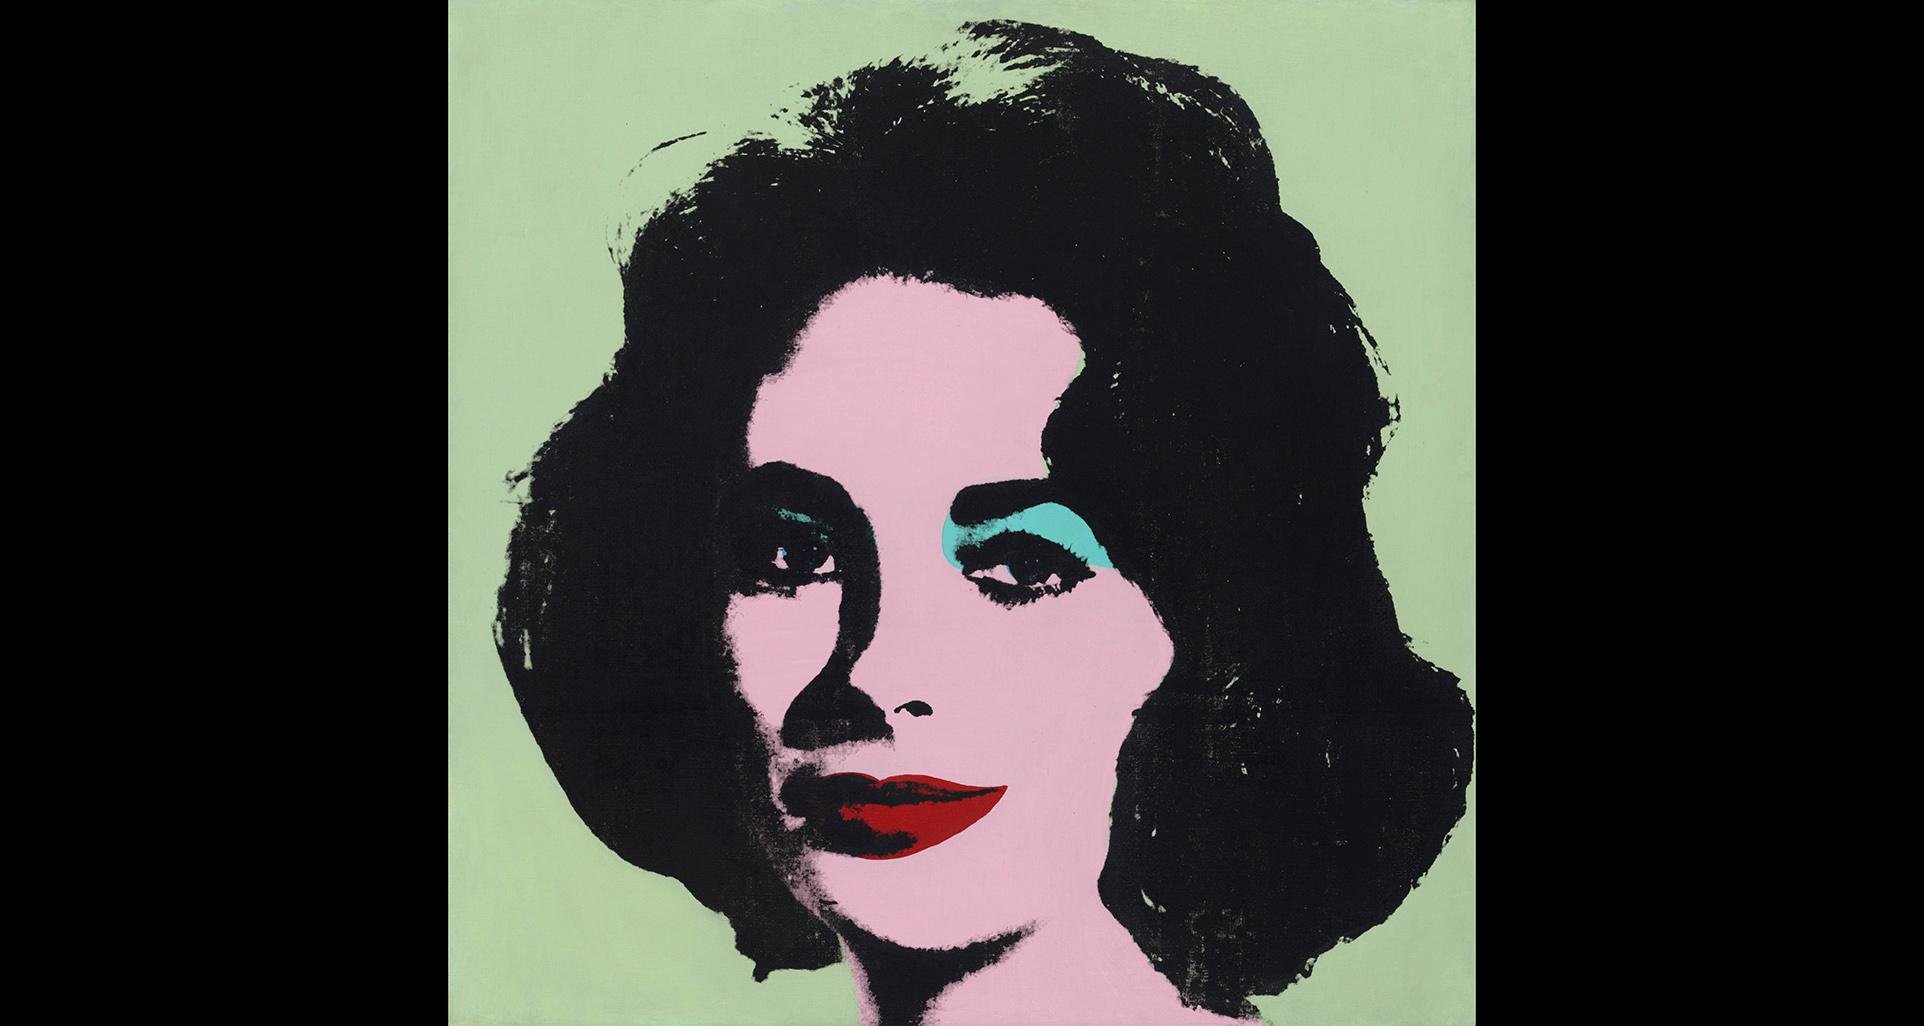 Andy Warhol. “Liz #3, [Early Colored Liz],” 1963. The Stefan T. Edlis collection, partial and promised gift to the Art Institute of Chicago. © 2019 The Andy Warhol Foundation for the Visual Arts, Inc. / Artists Rights Society (ARS), New York.